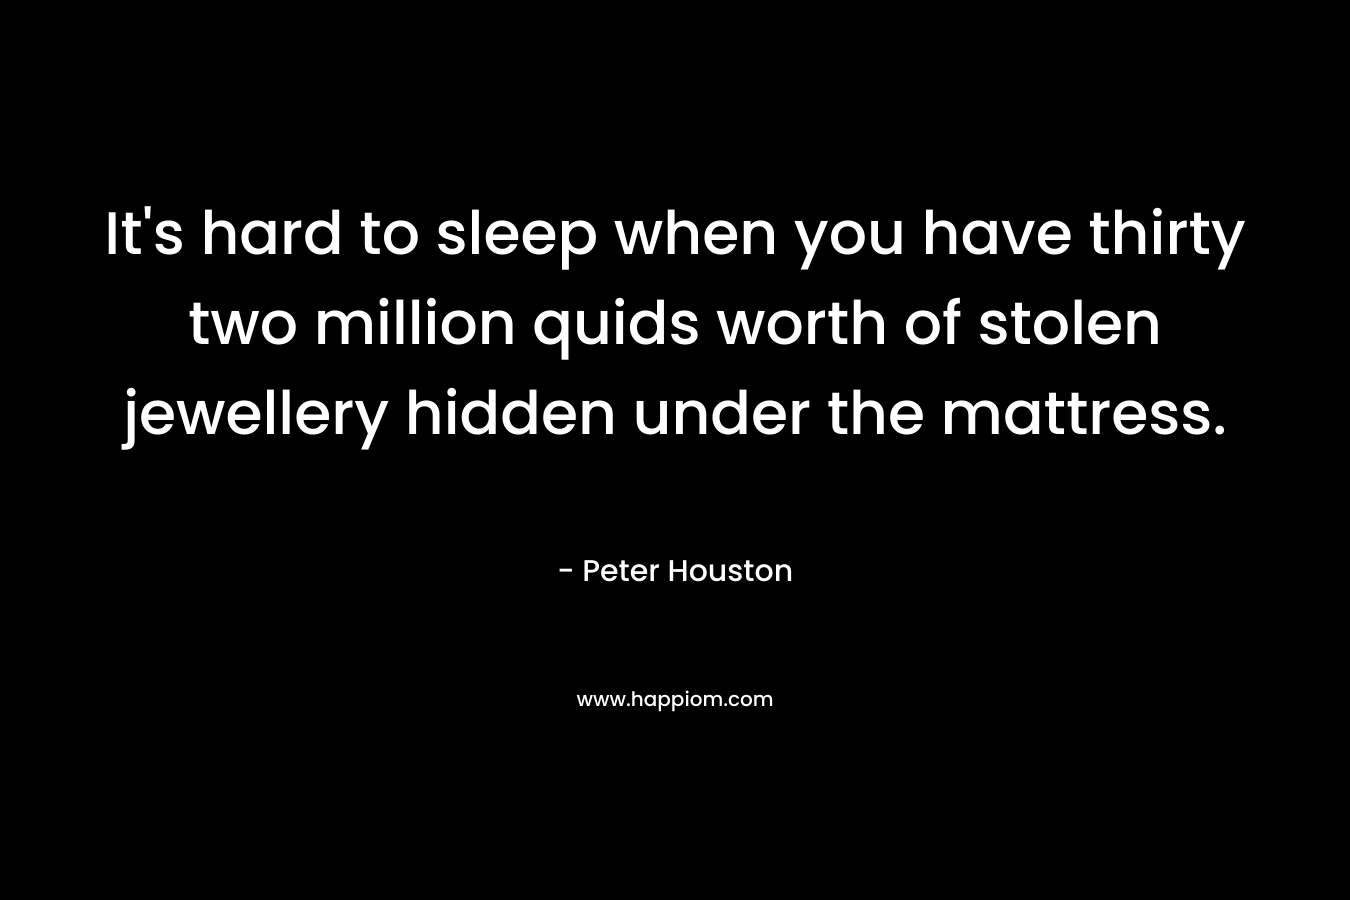 It’s hard to sleep when you have thirty two million quids worth of stolen jewellery hidden under the mattress. – Peter Houston